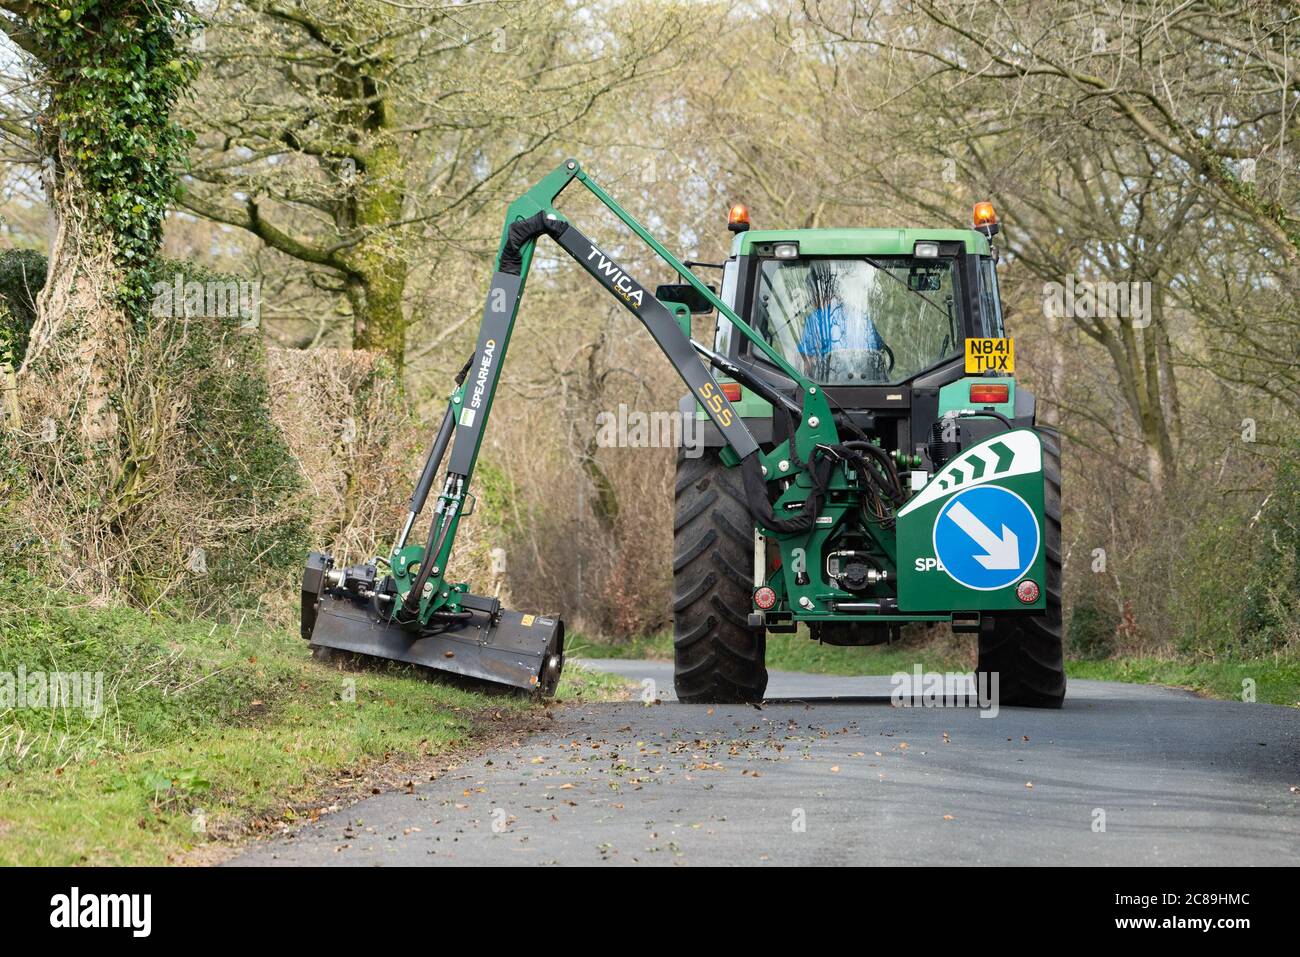 Cutting the grass verges with Spearhead mower and John Deere tractor, Chipping, Preston, Lancashire, England, United Kingdom. Stock Photo